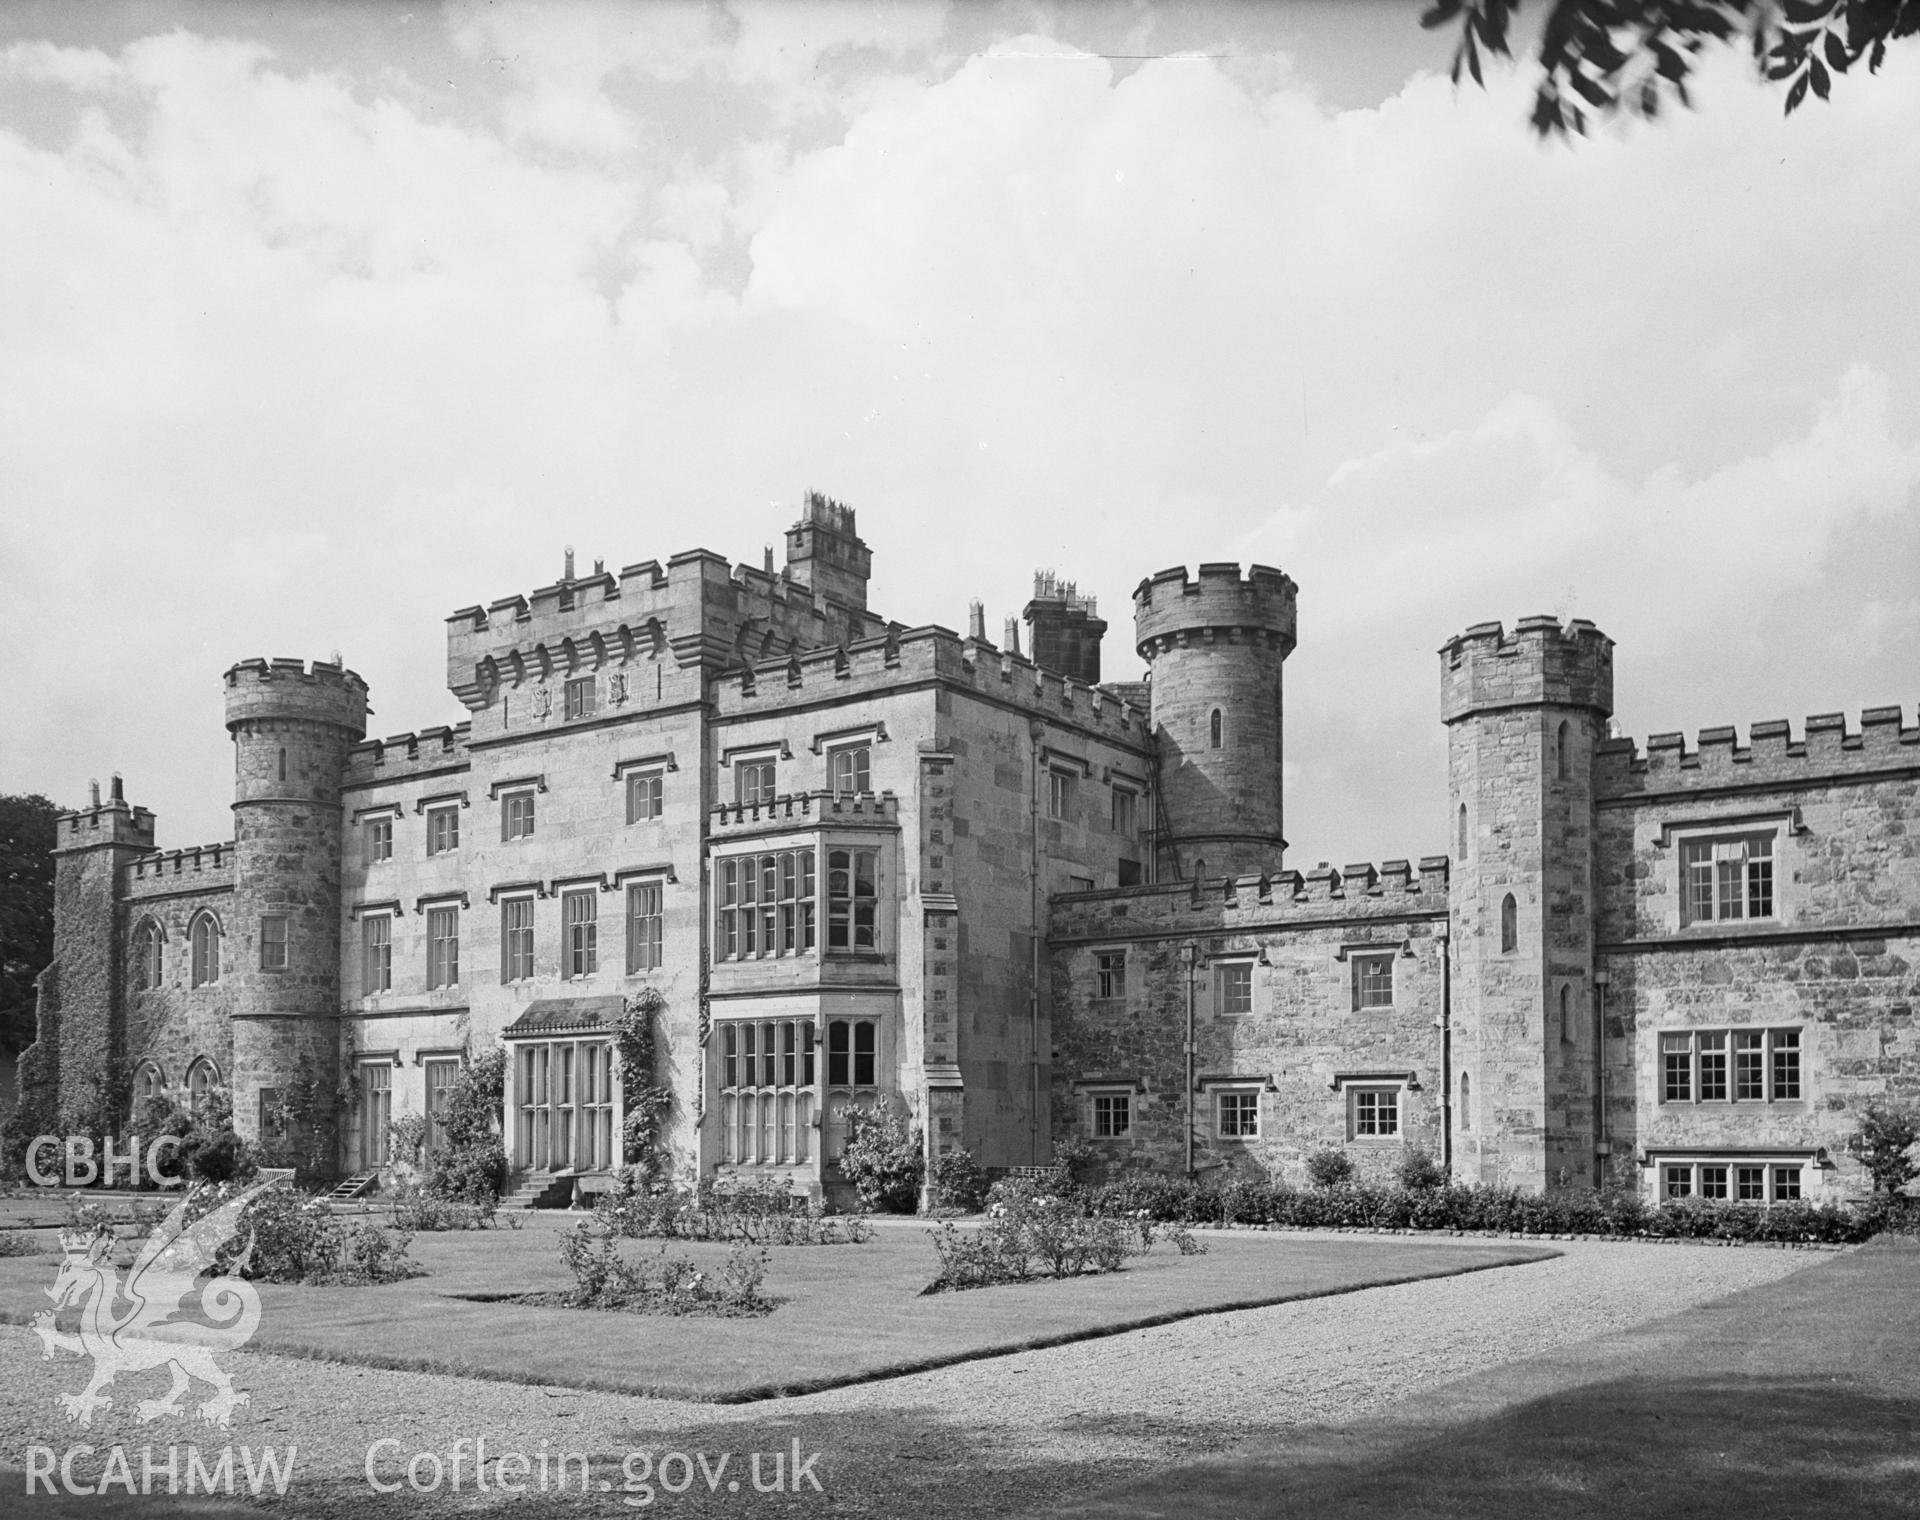 A view of Hawerden Castle from the south west. Shows the building is both 2 and 3 storeys high.